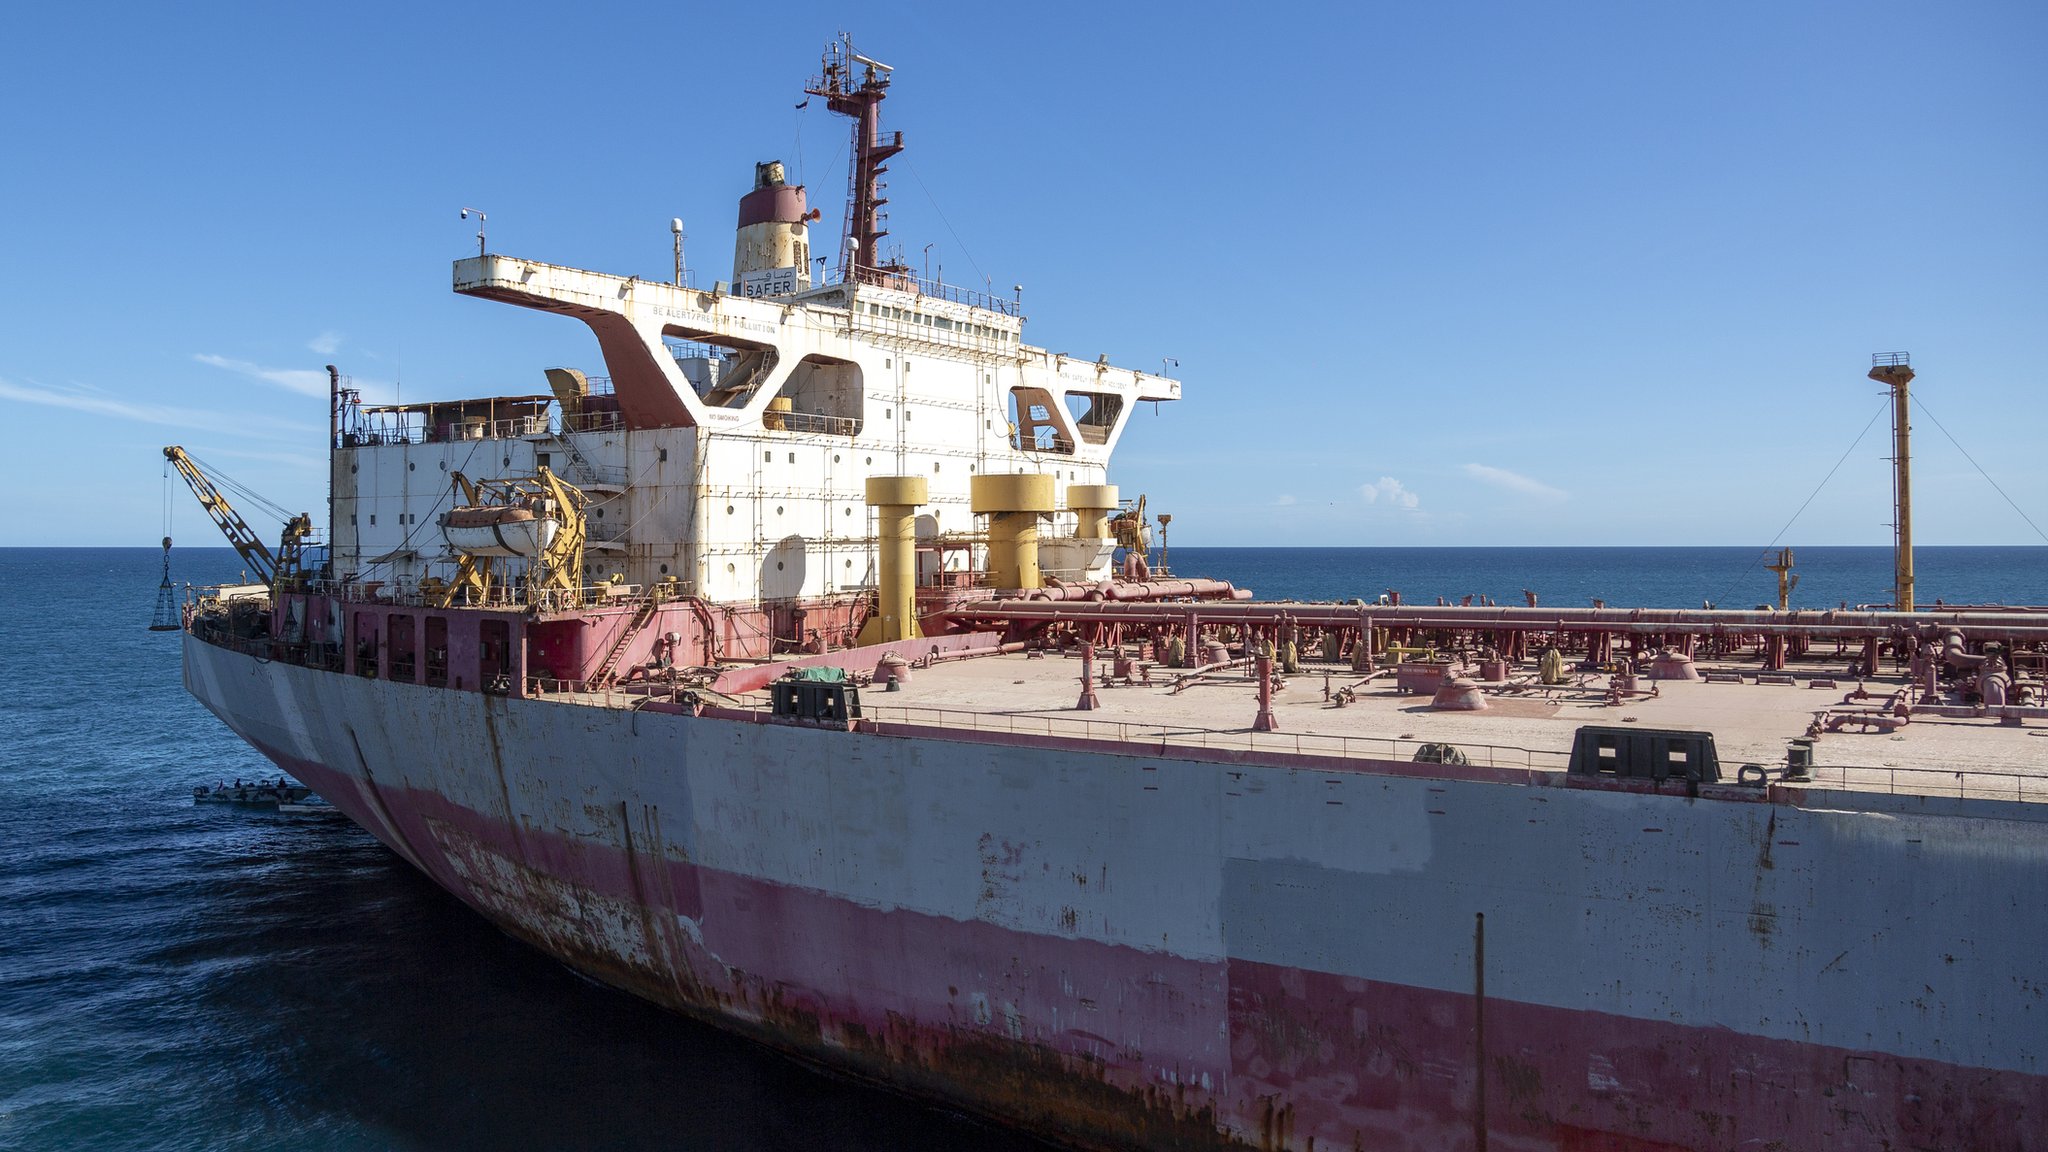 UN begins salvage operation to stop catastrophic oil spill off Yemen